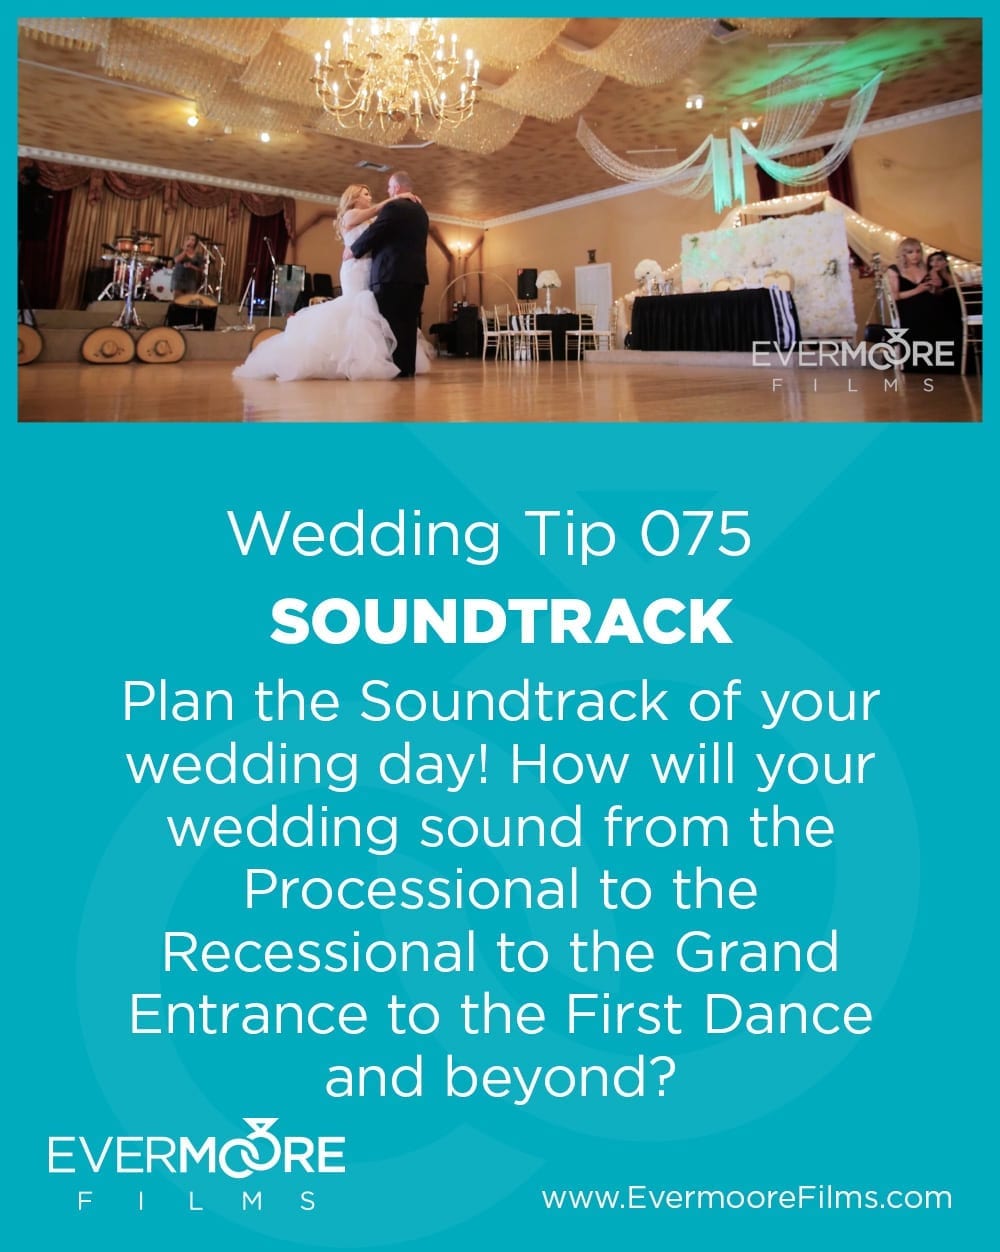 Think about what music you want for your wedding! | www.EvermooreFilms.com